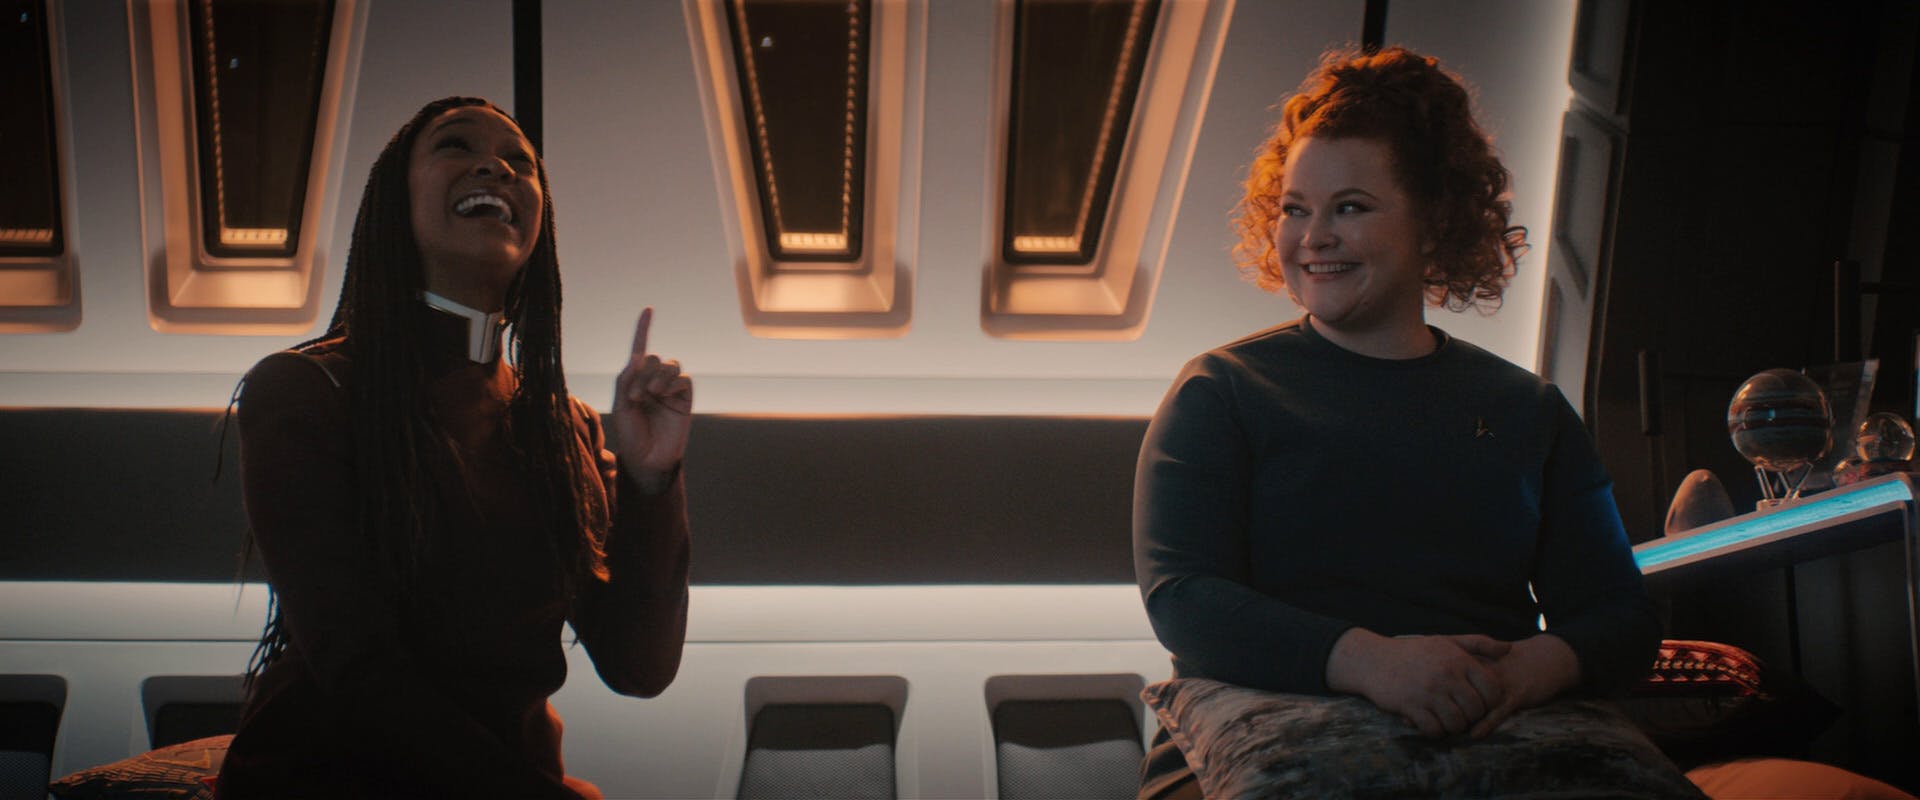 Michael Burnham and Sylvia Tilly find a moment of levity and joy in each other's presence in Tilly's quarters in 'All Is Possible'